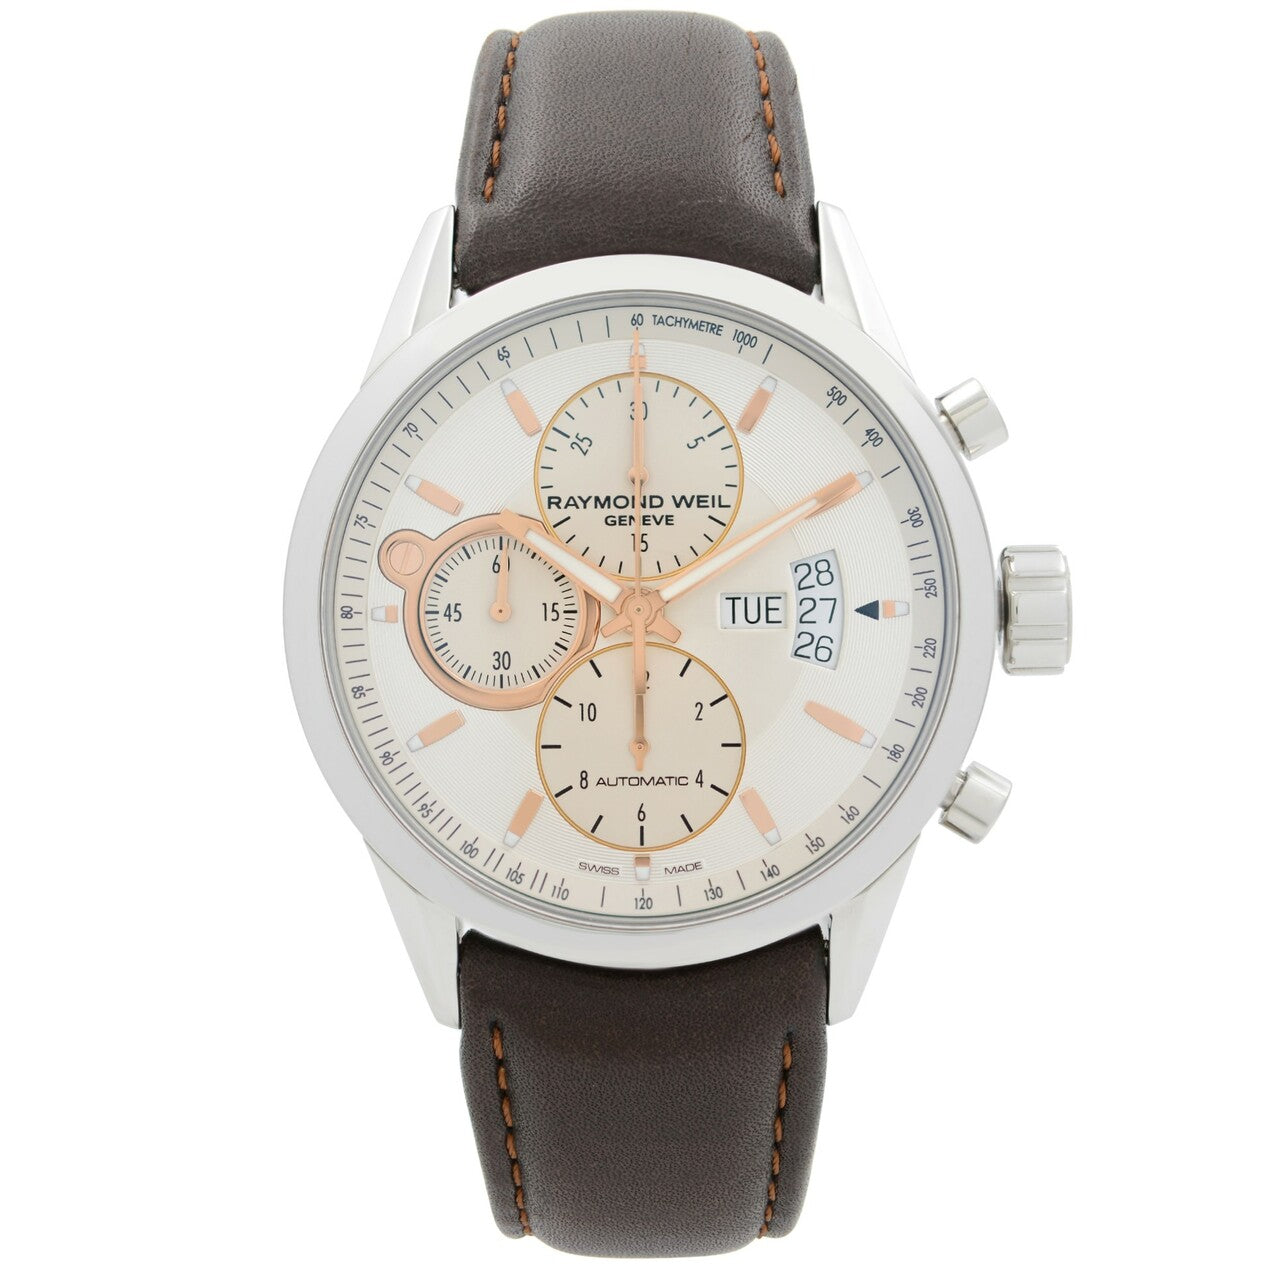 Raymond Weil Men's Automatic Movement White Dial Watch - RW-0066